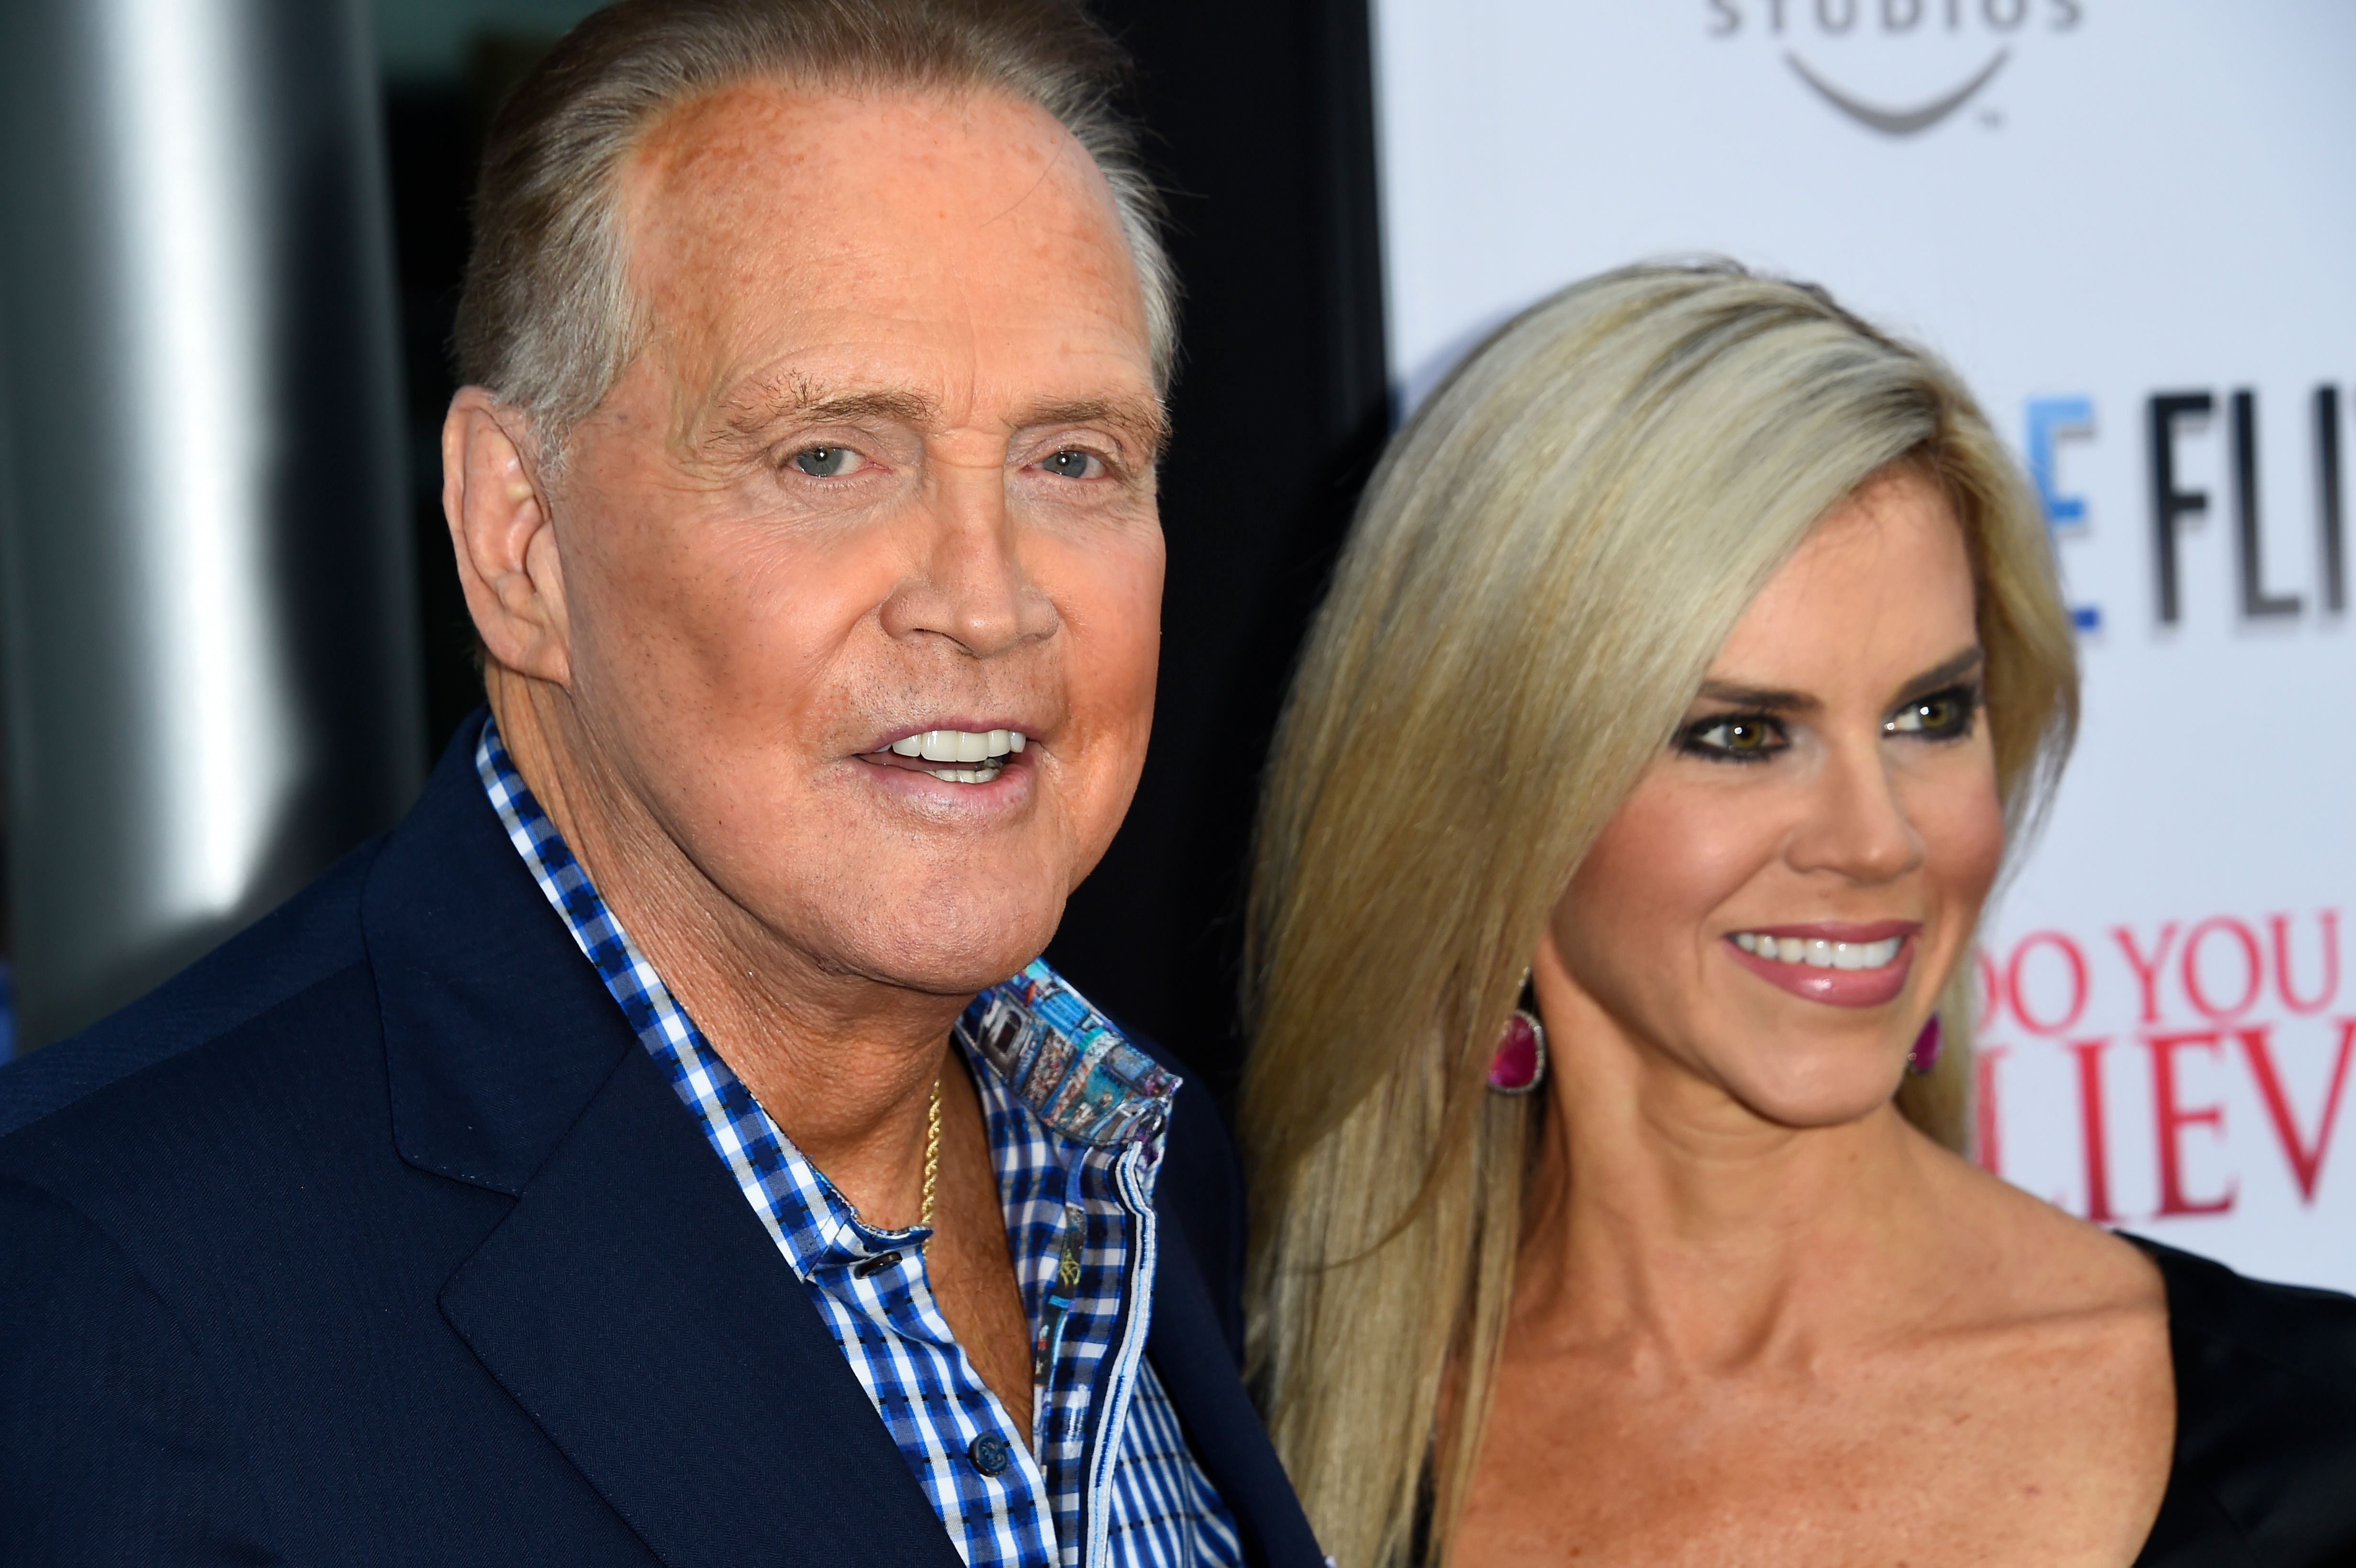 Lee Majors and his wife Faith Majors attend the premiere of "Do You Believe?" March 16, 2015, at Archlight Cinemas in Hollywood, California | Source: Getty Images